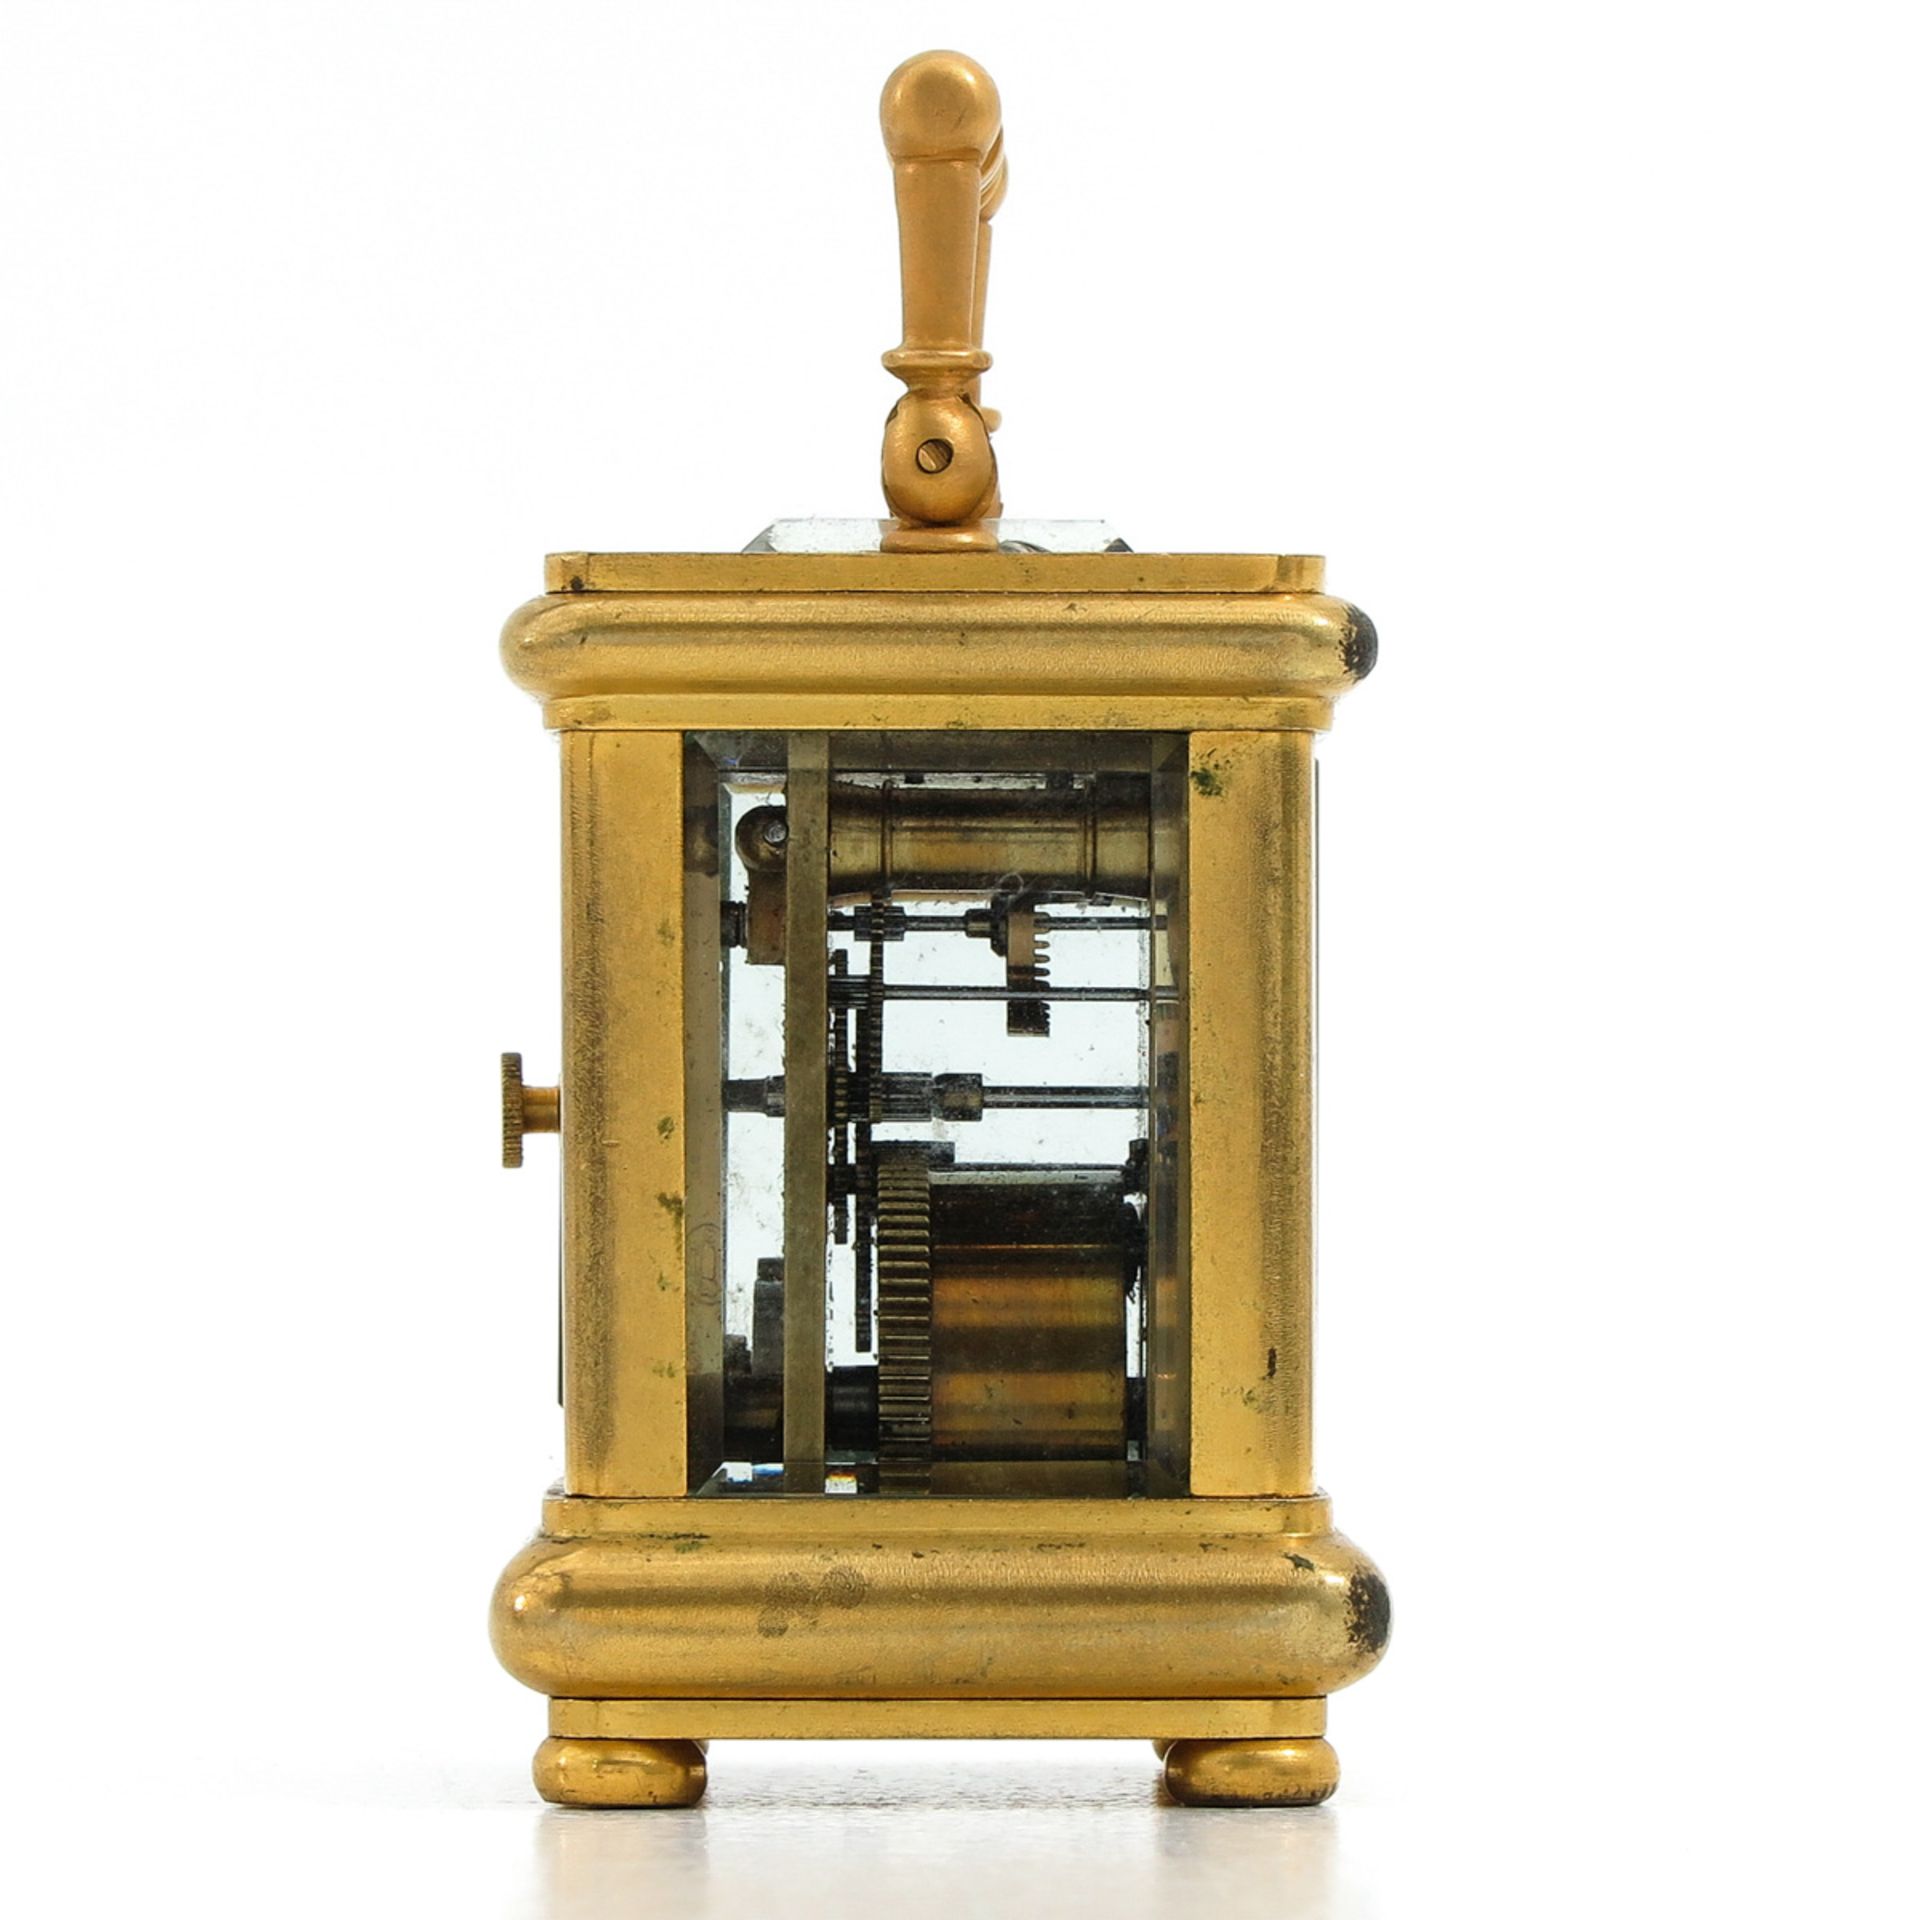 A Le Roy & Fils Carriage Clock - Image 4 of 8